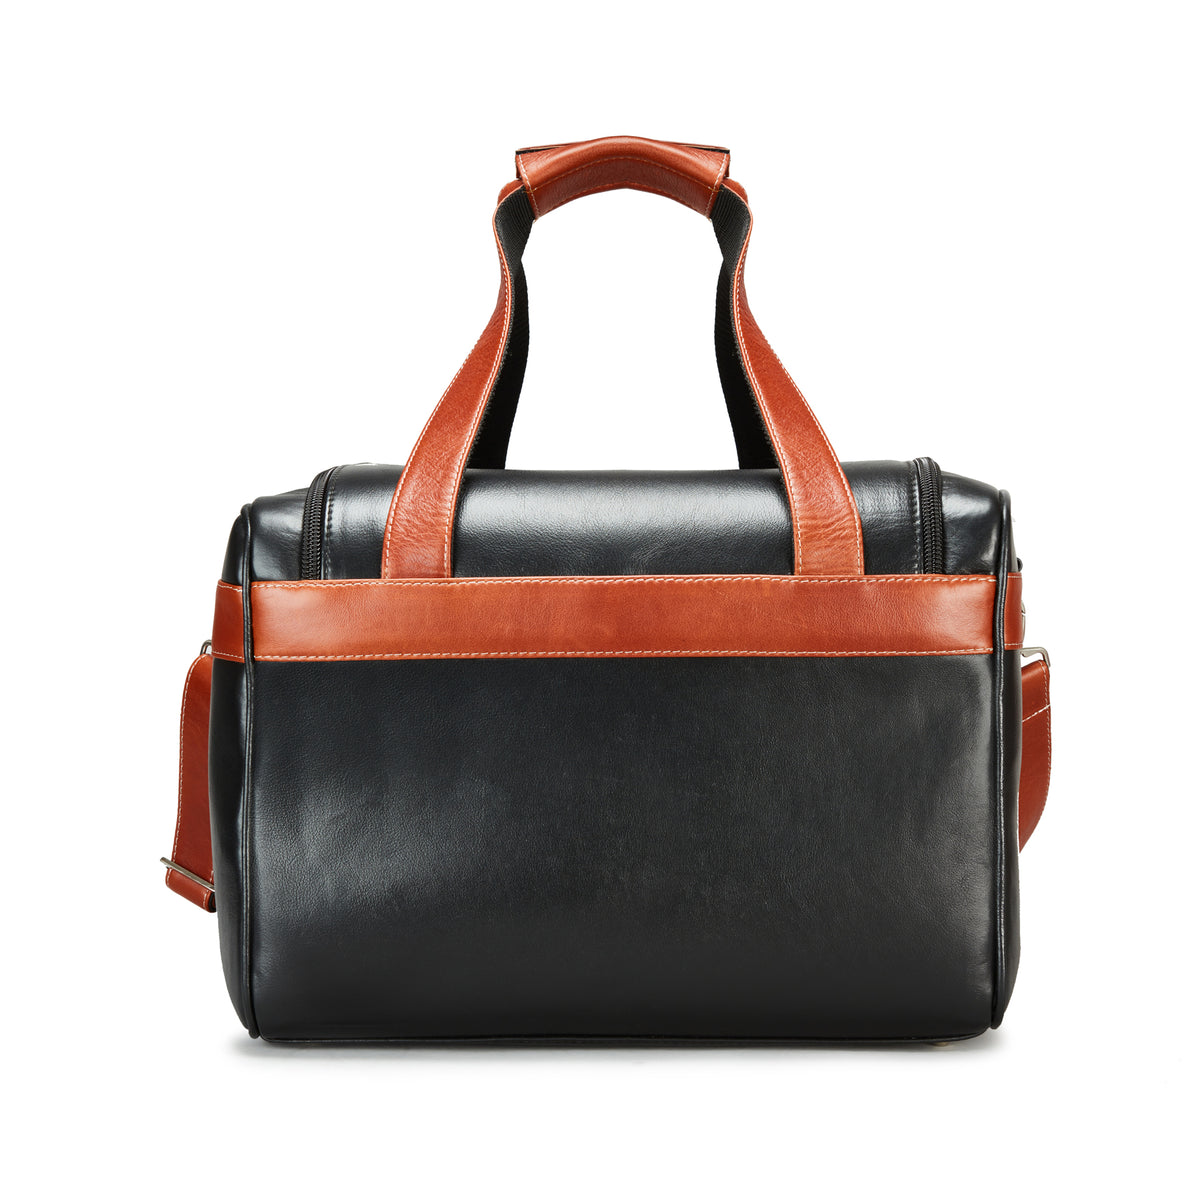 TIWIA Leather VeloRacing Bag 44L - blsglobal.net